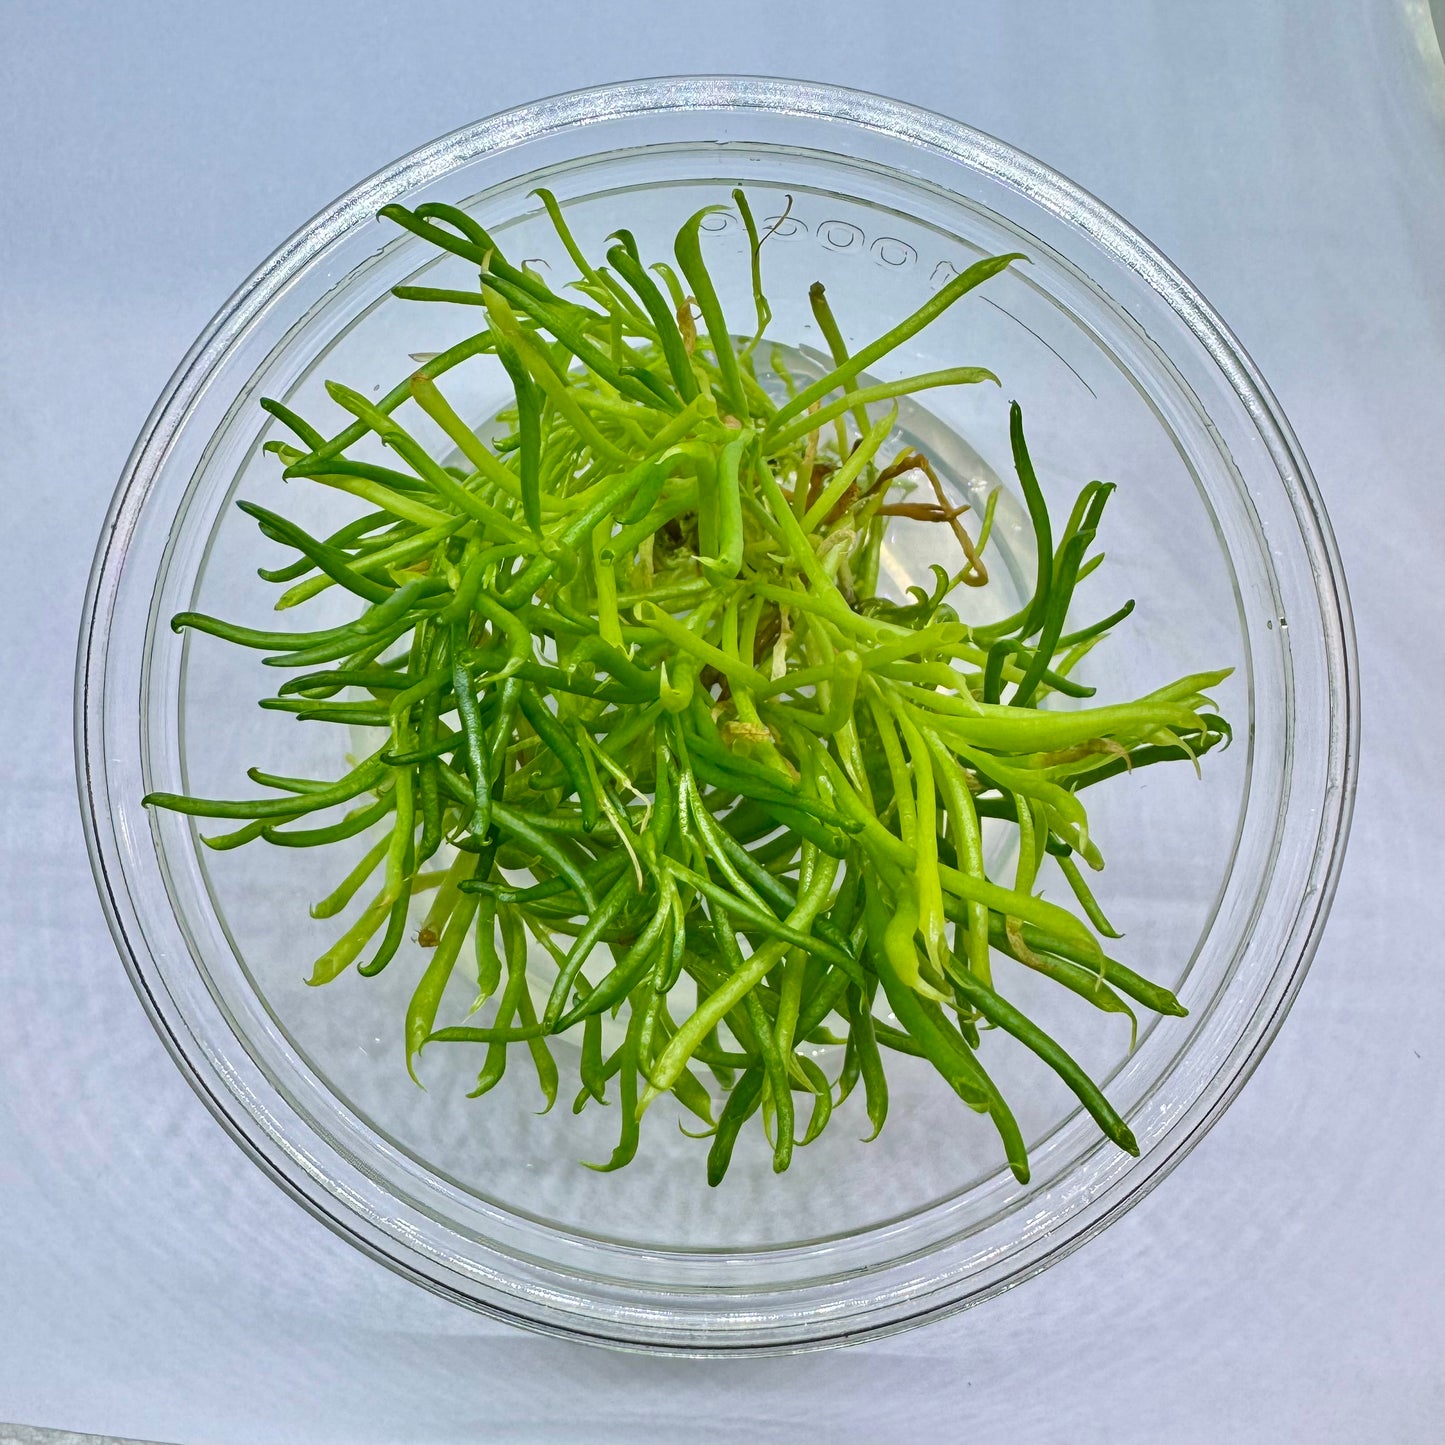 Darlingtonia californica 'Red Flower' Cobra Lily Plant - Tissue Culture Cup